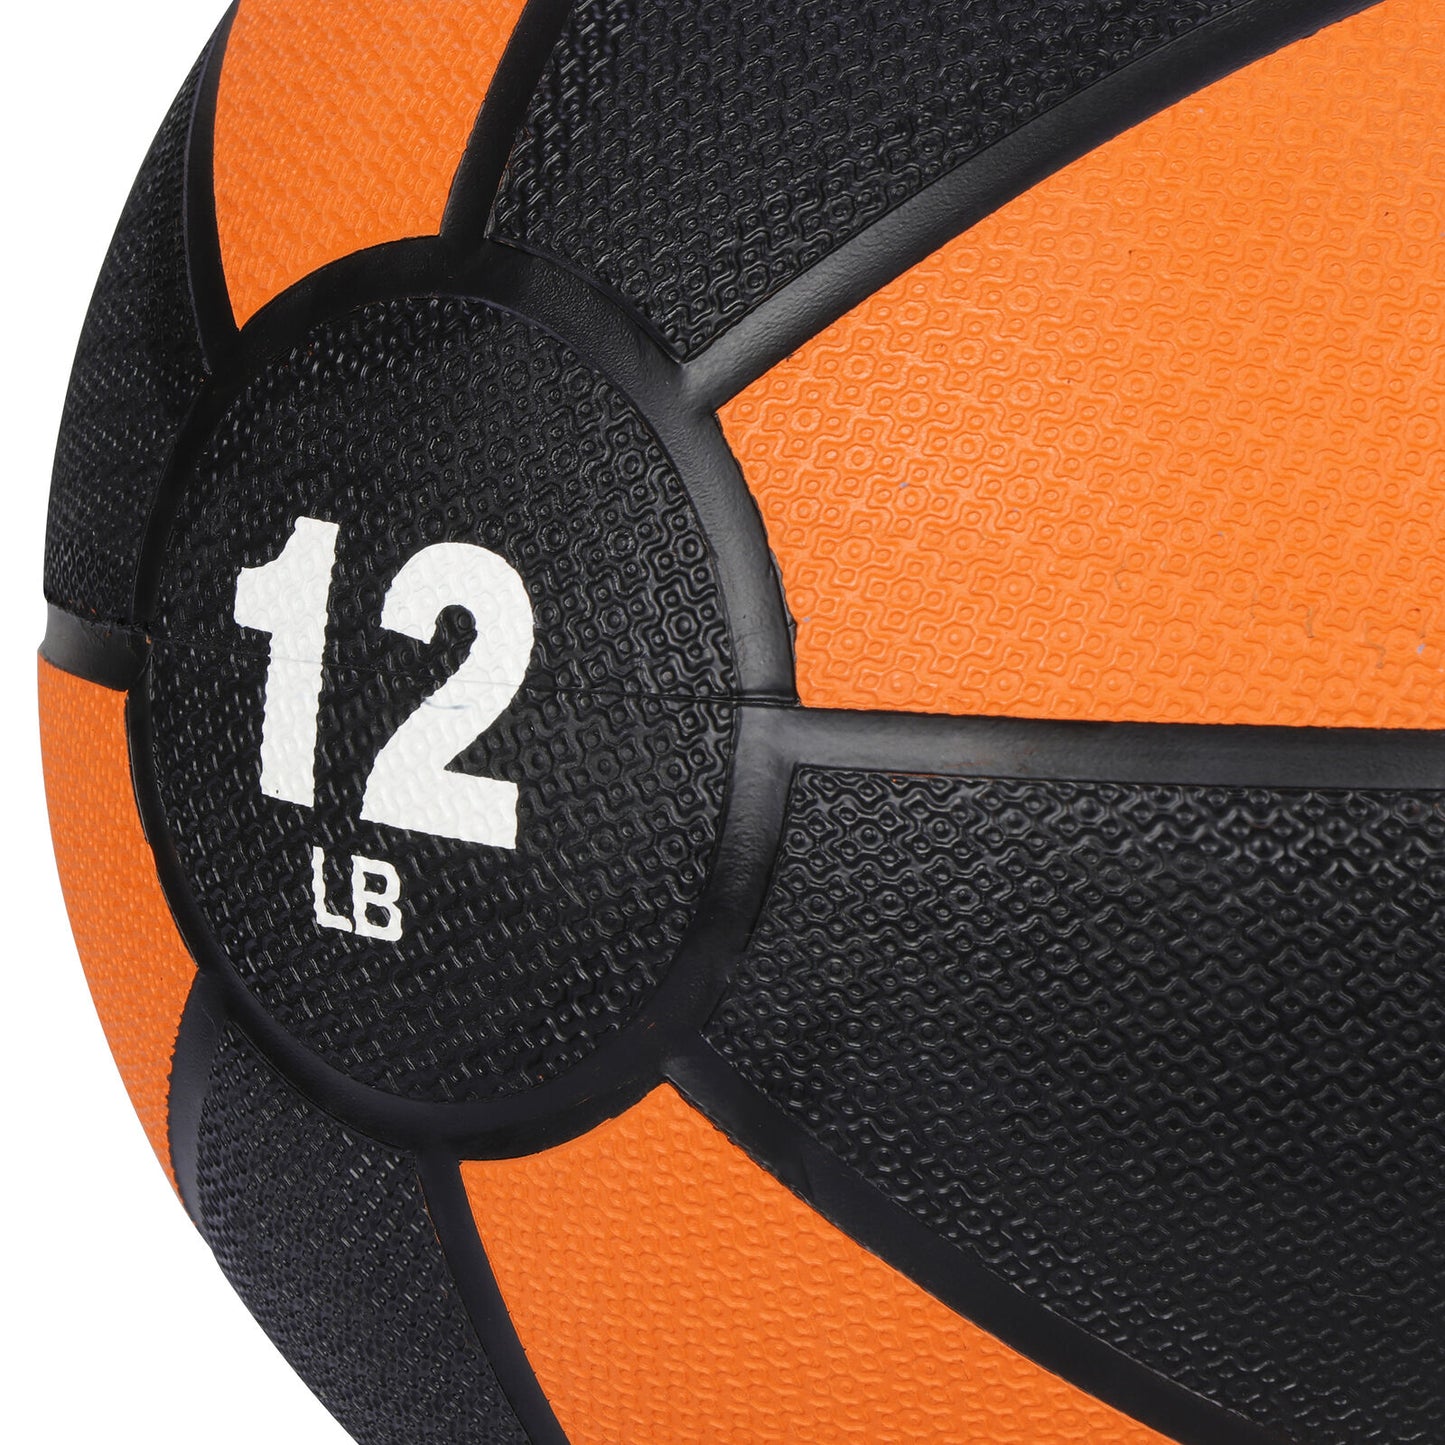 Pro Workout Weighted Easy Grip Medicine Ball Body Balance Sport Equipment 12lbs